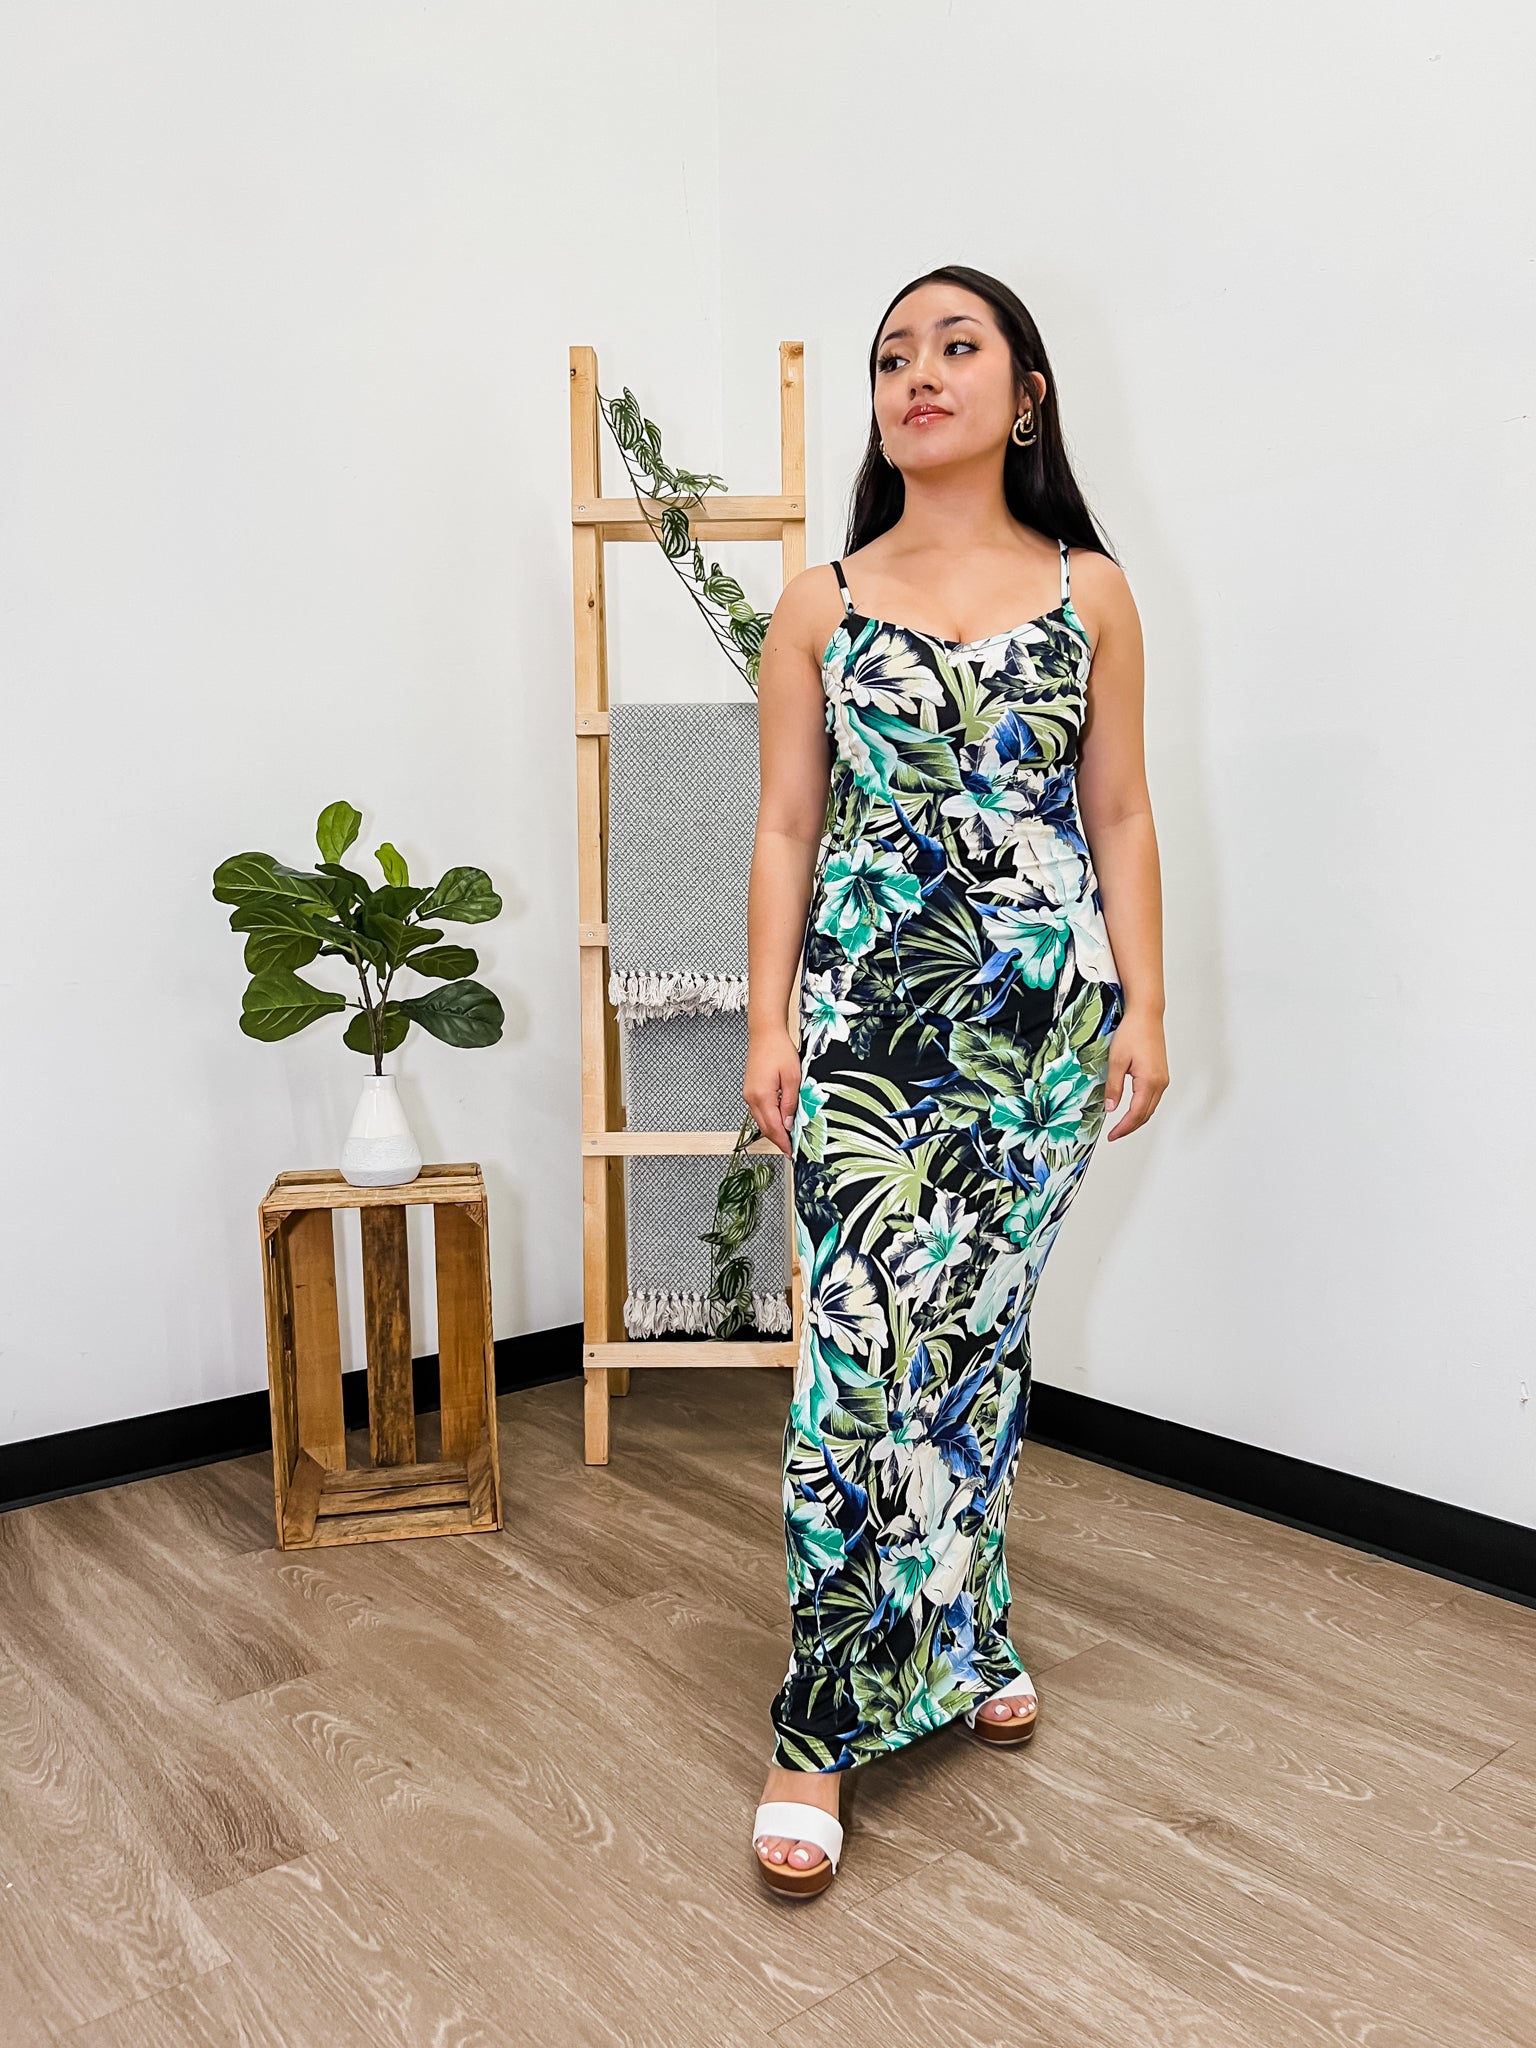 Shop These 17 Slimming Maxi Dresses for Summer